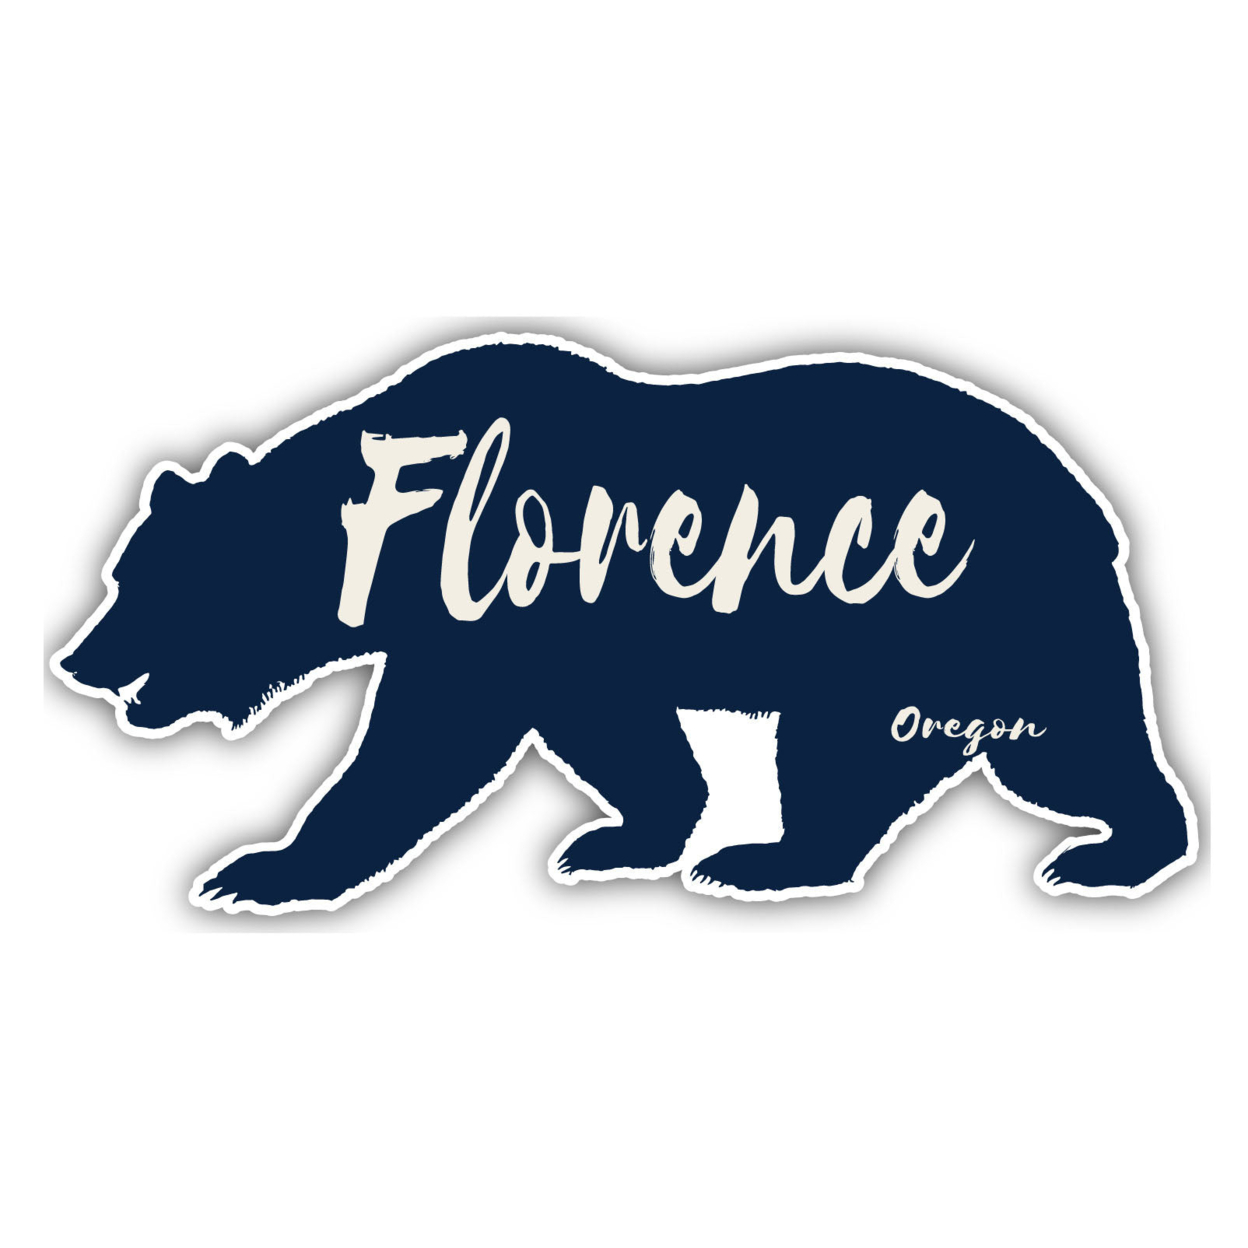 Florence Oregon Souvenir Decorative Stickers (Choose Theme And Size) - 4-Pack, 8-Inch, Bear